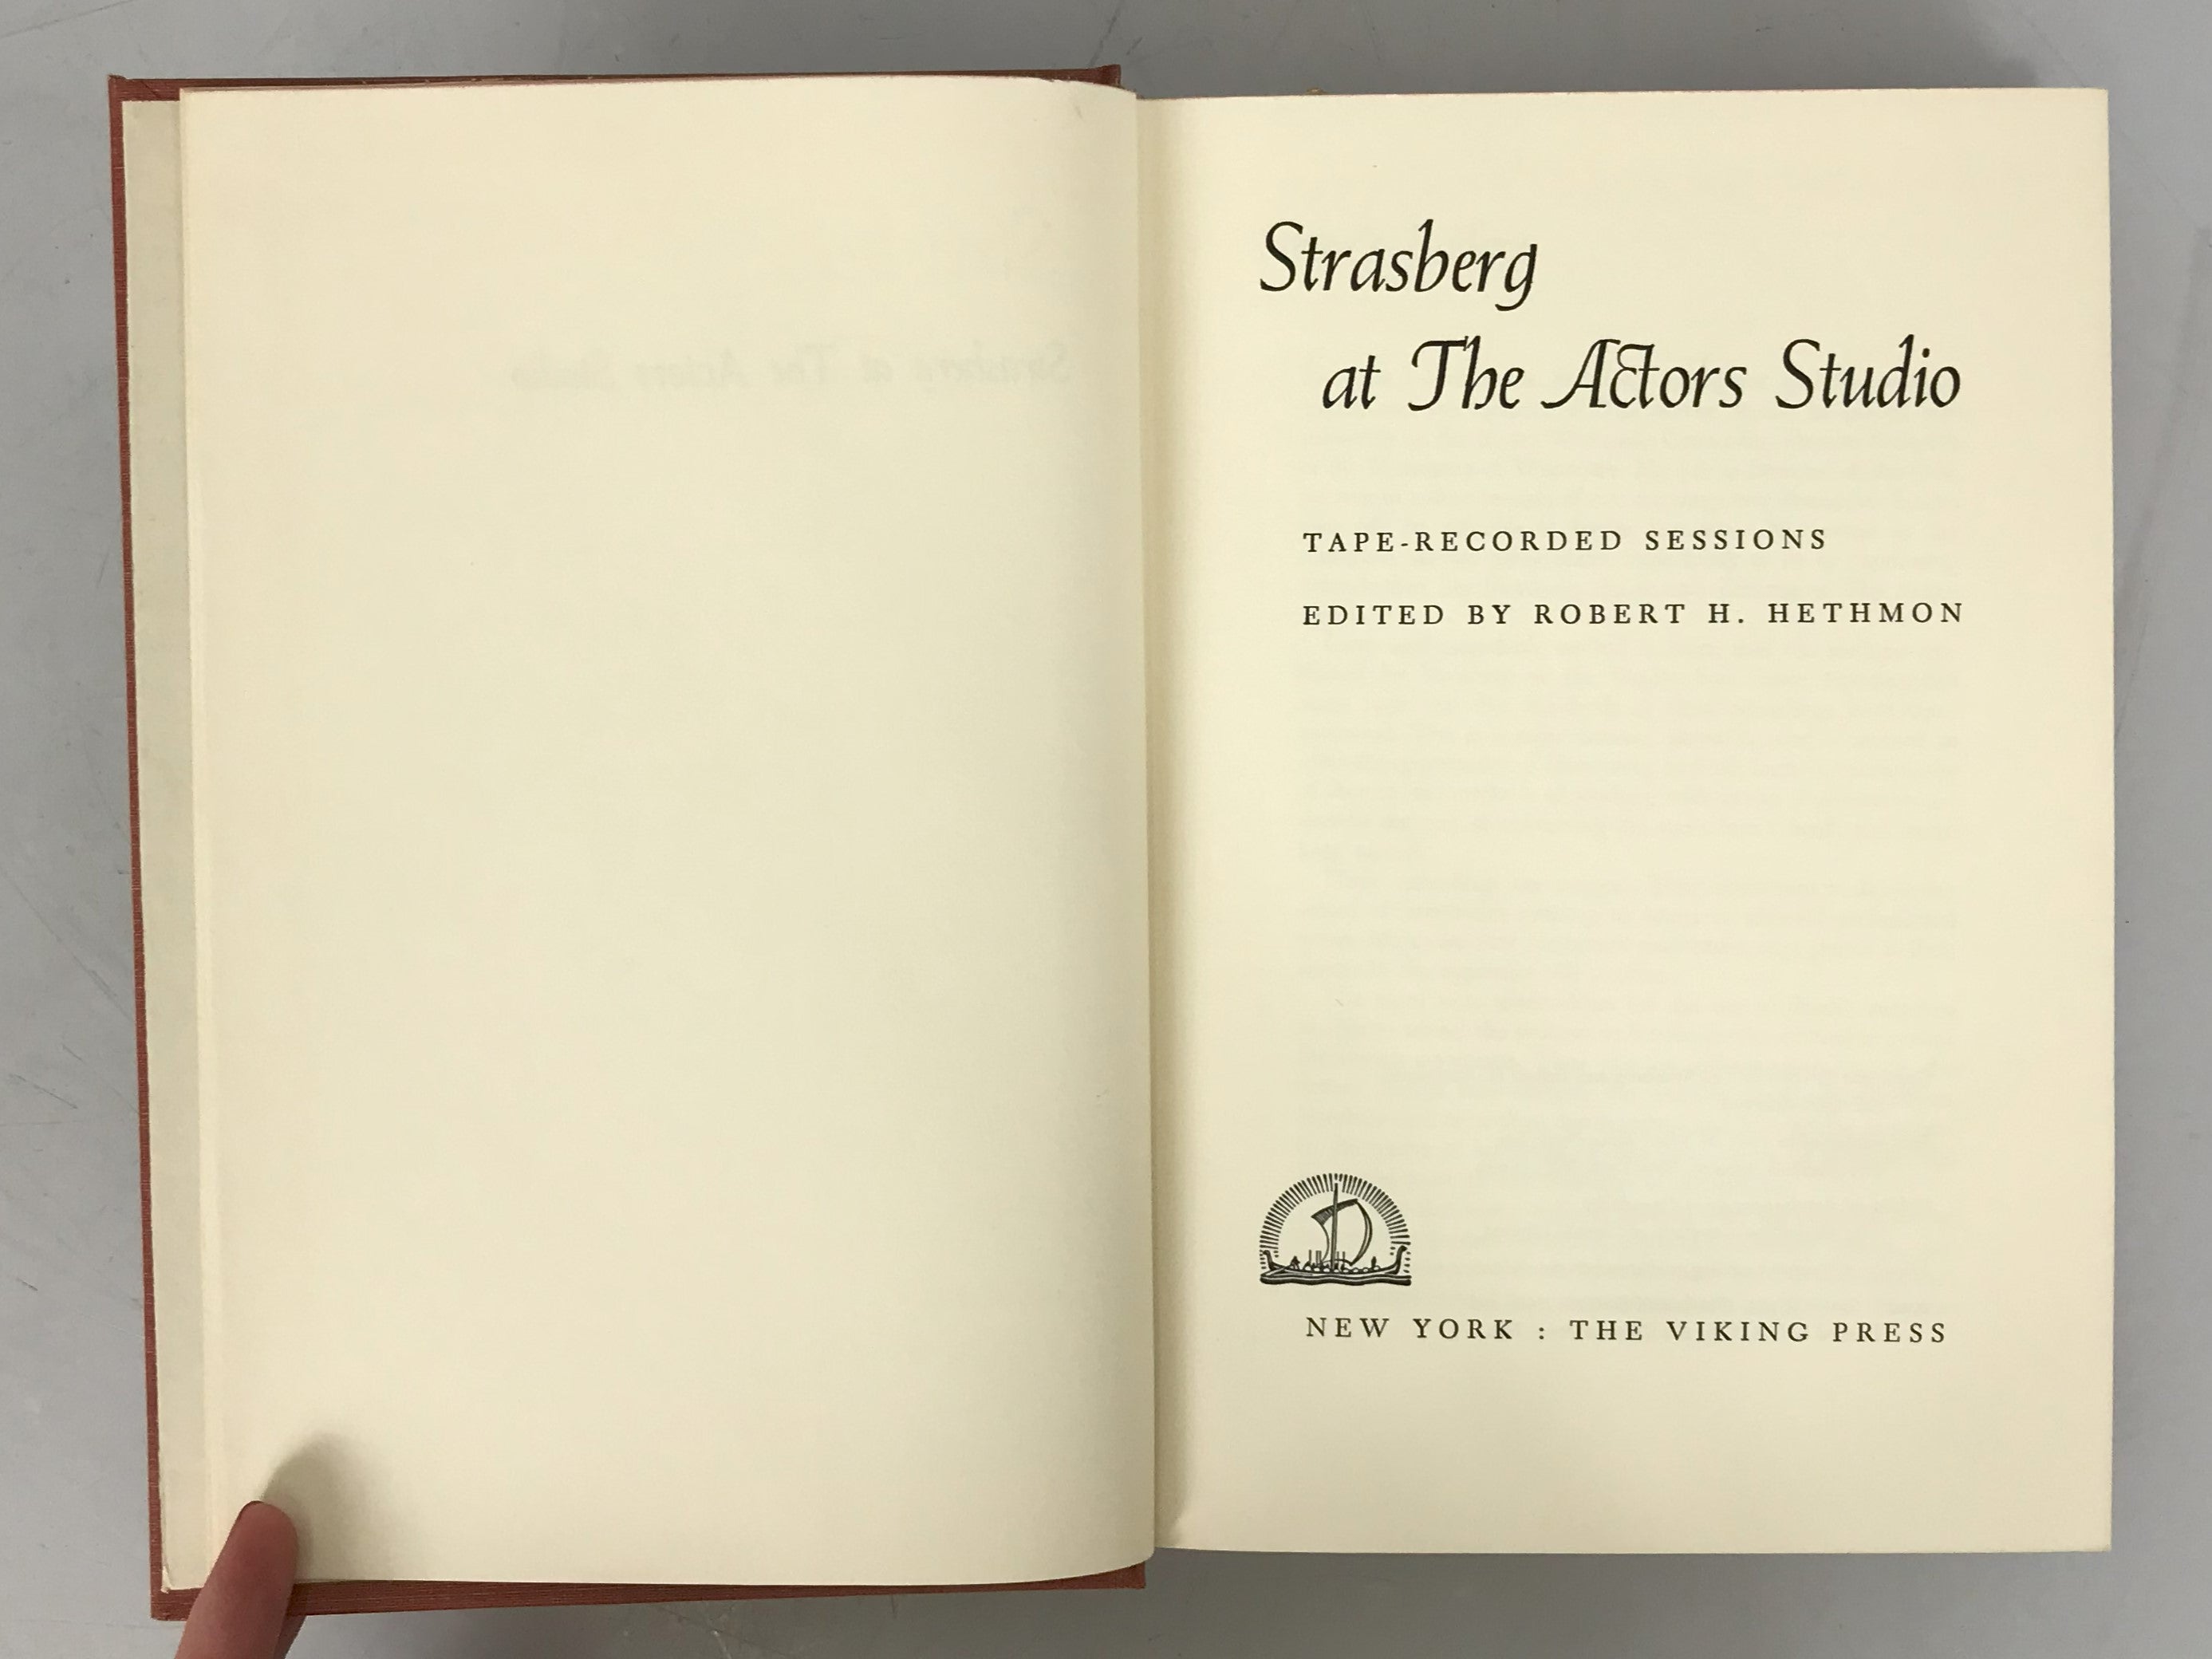 Strasberg At the Actors Studio Tape-Recorded Sessions Edited by Robert Hethmon First Edition Review Copy 1965 HC DJ